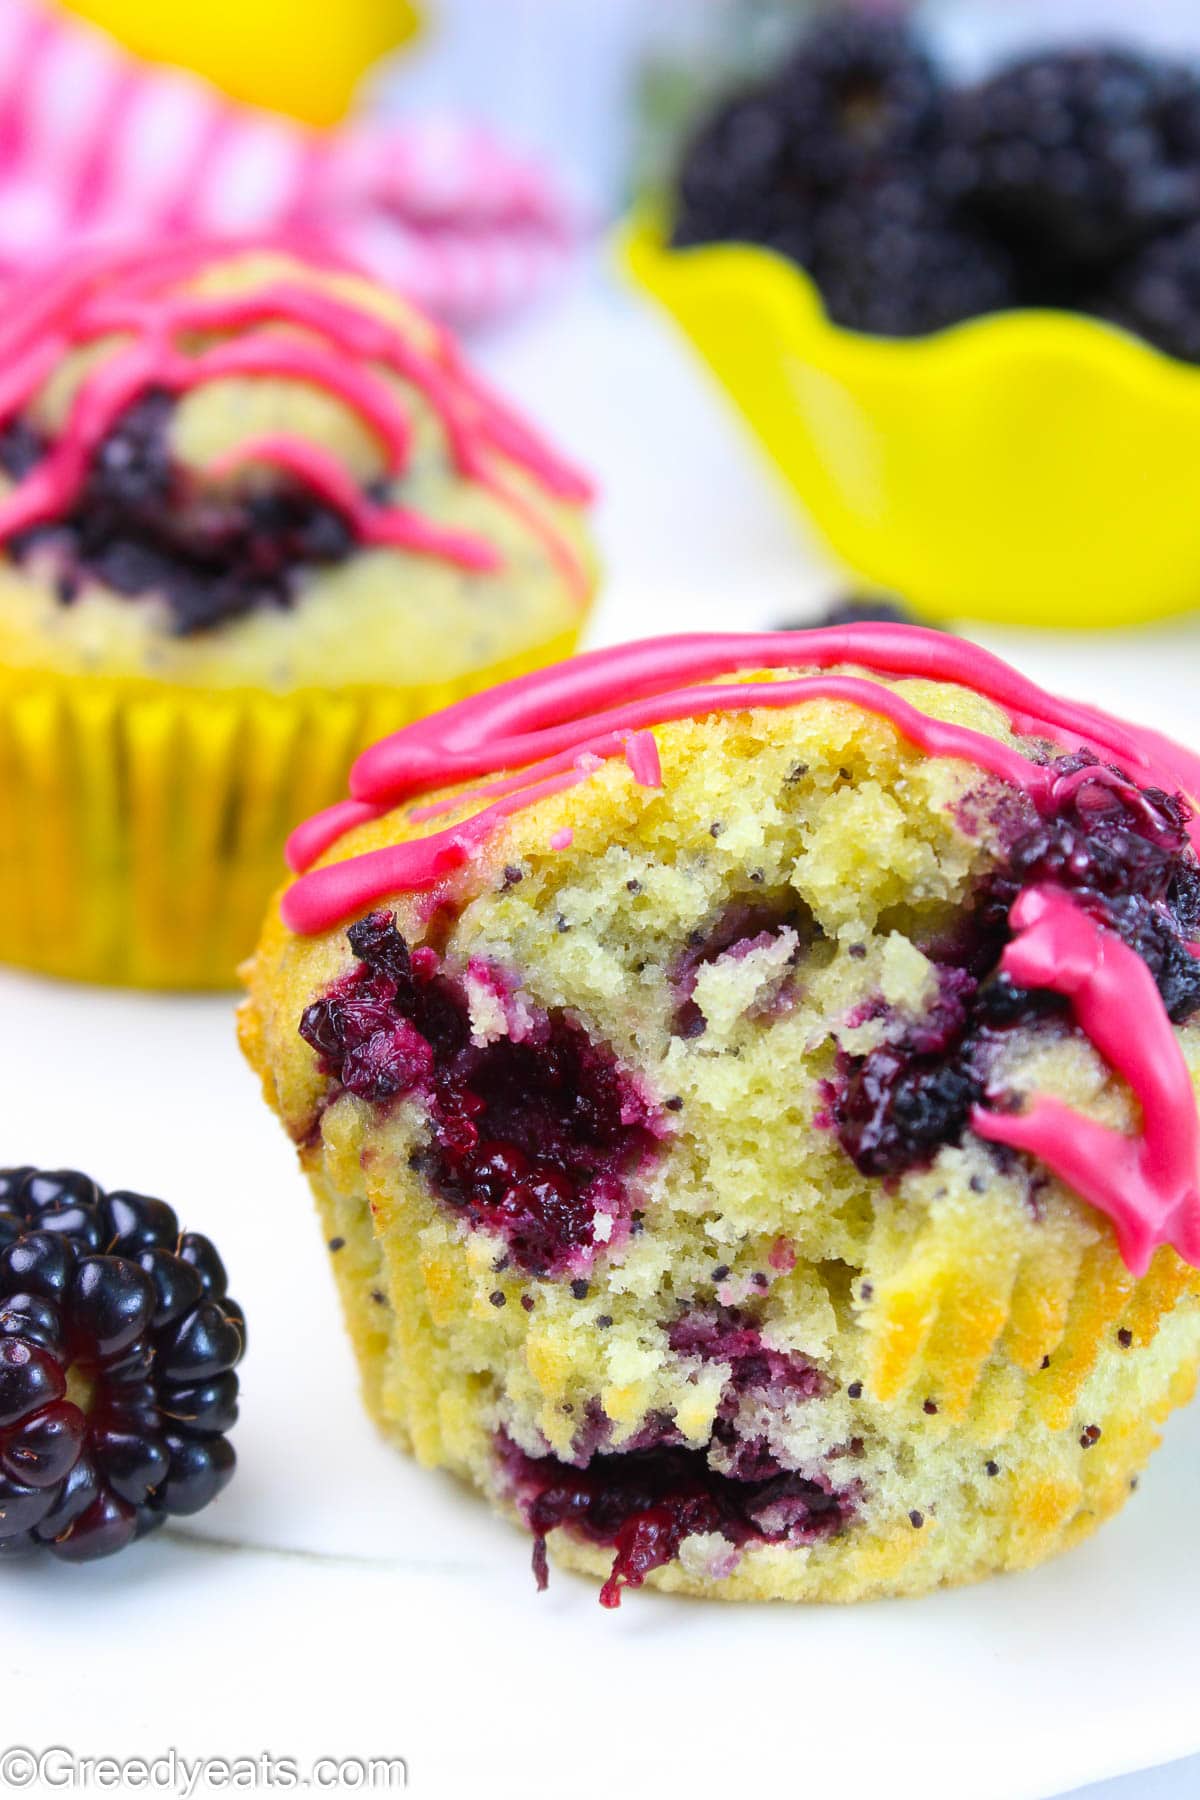 Tall, light and soft lemon poppyseed muffins dotted with blackberries and pink glaze.